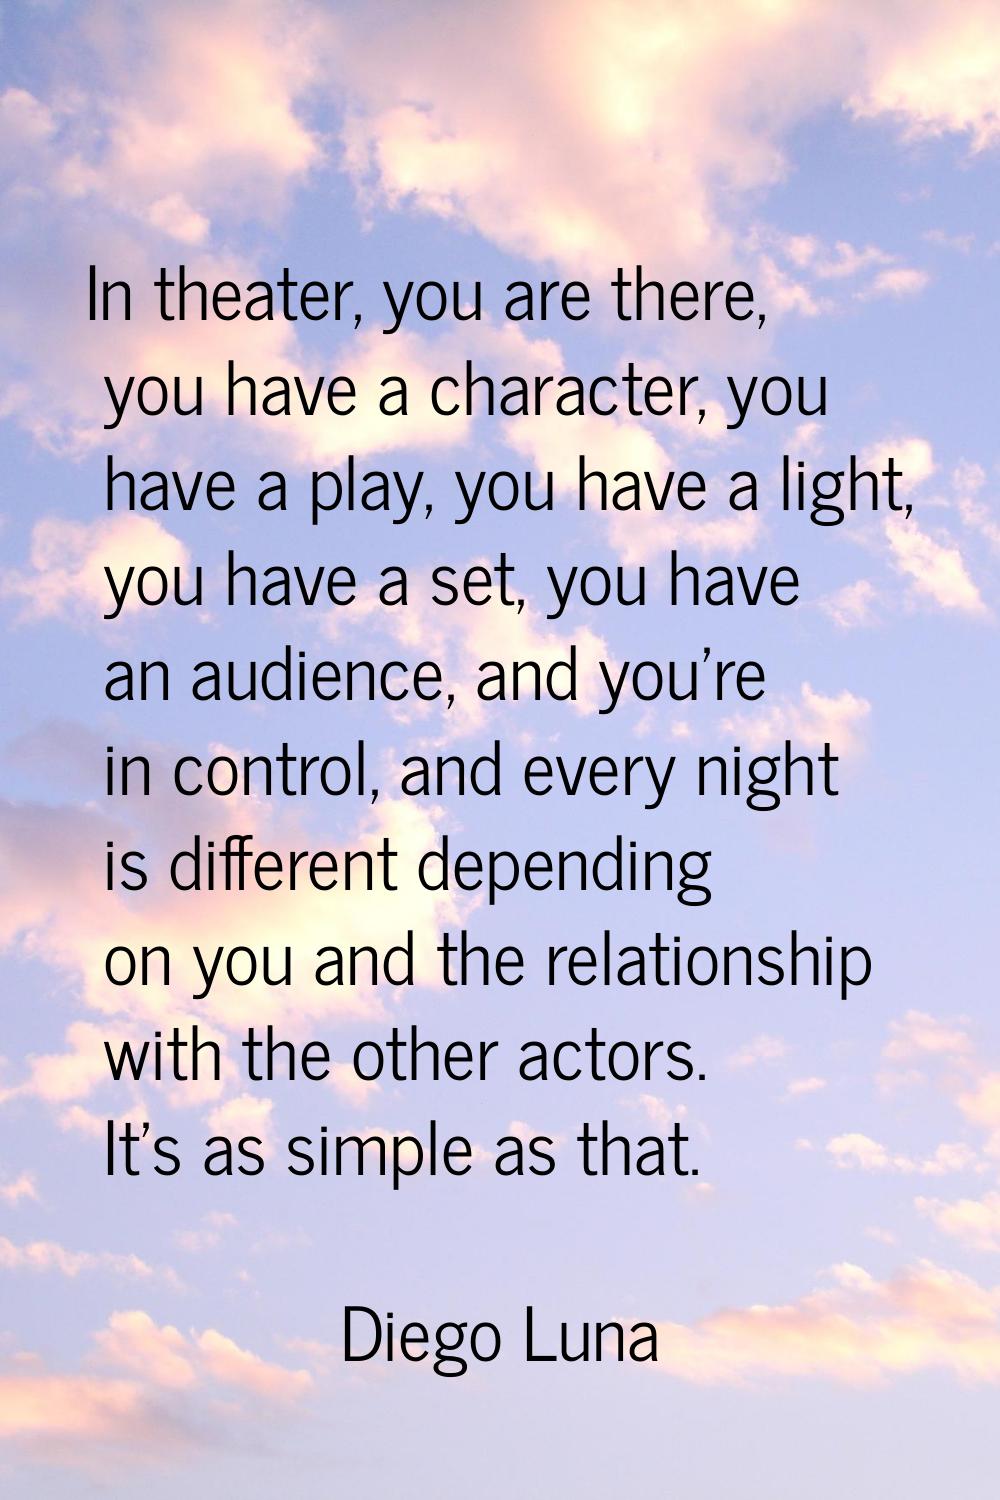 In theater, you are there, you have a character, you have a play, you have a light, you have a set,